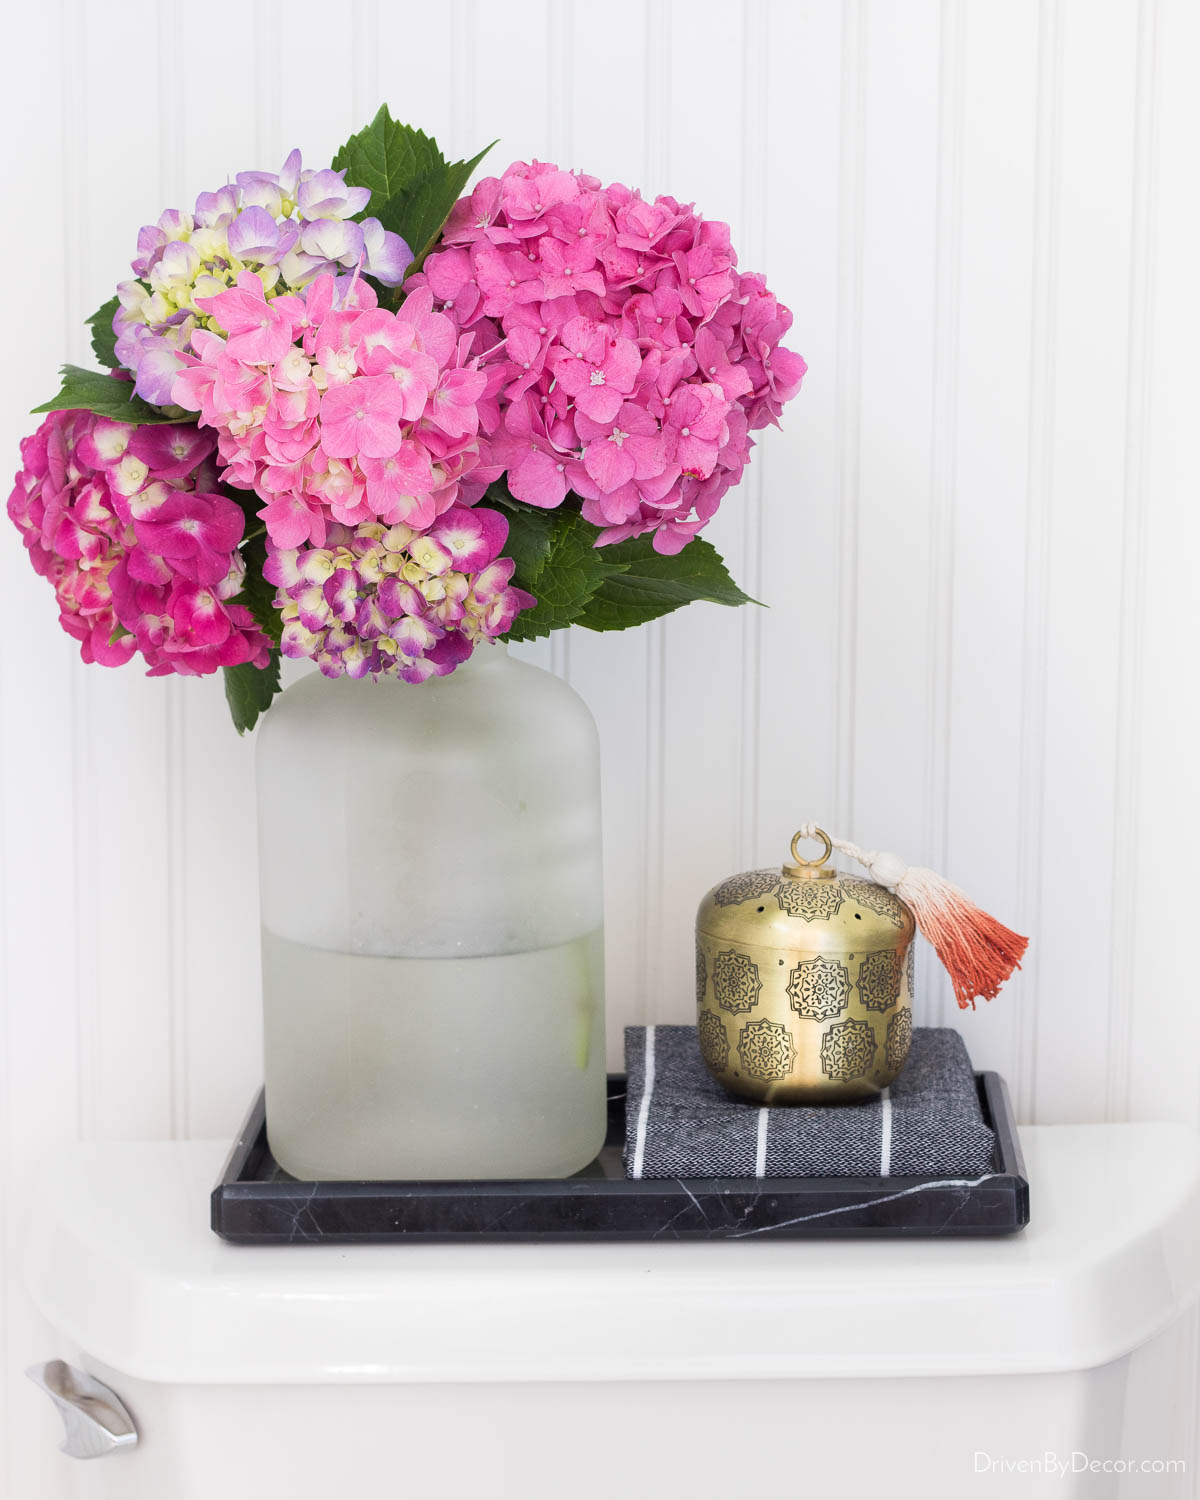 Black marble tray on toilet tank with vase of flowers and candle